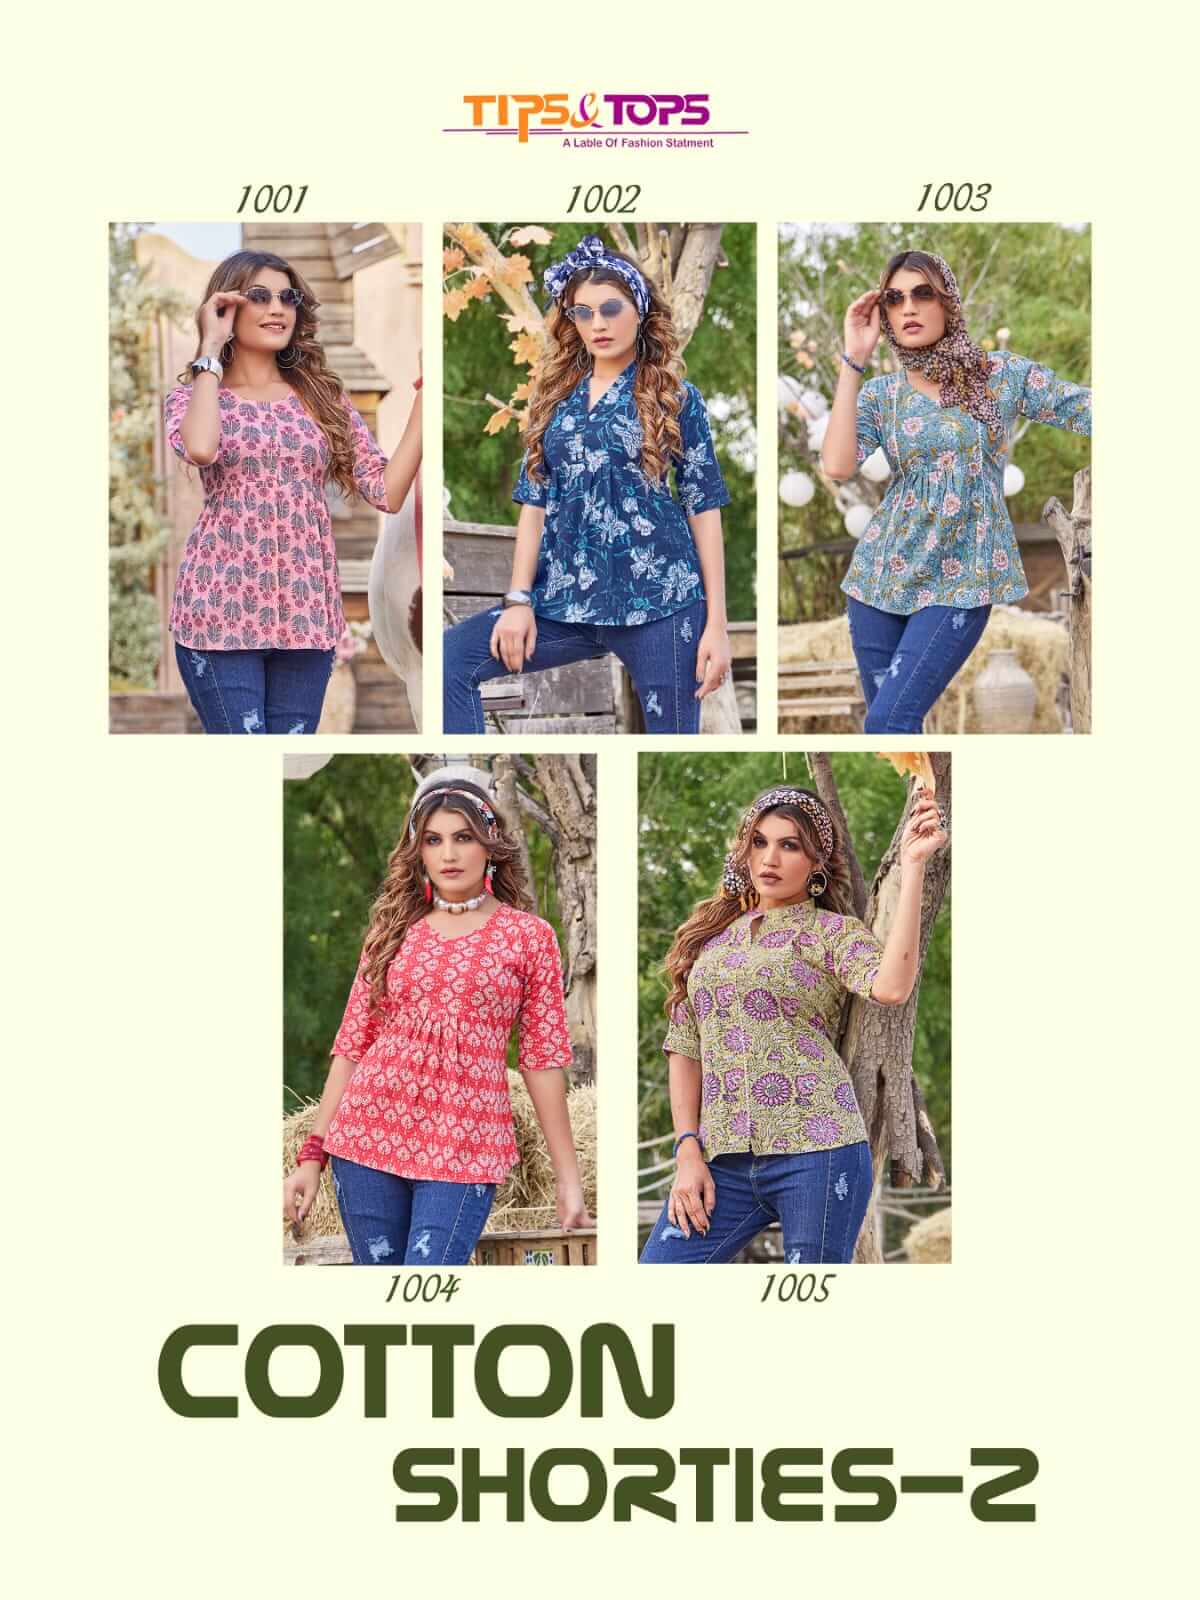 Tips And Tops Cotton Shorties Vol 2 collection 6